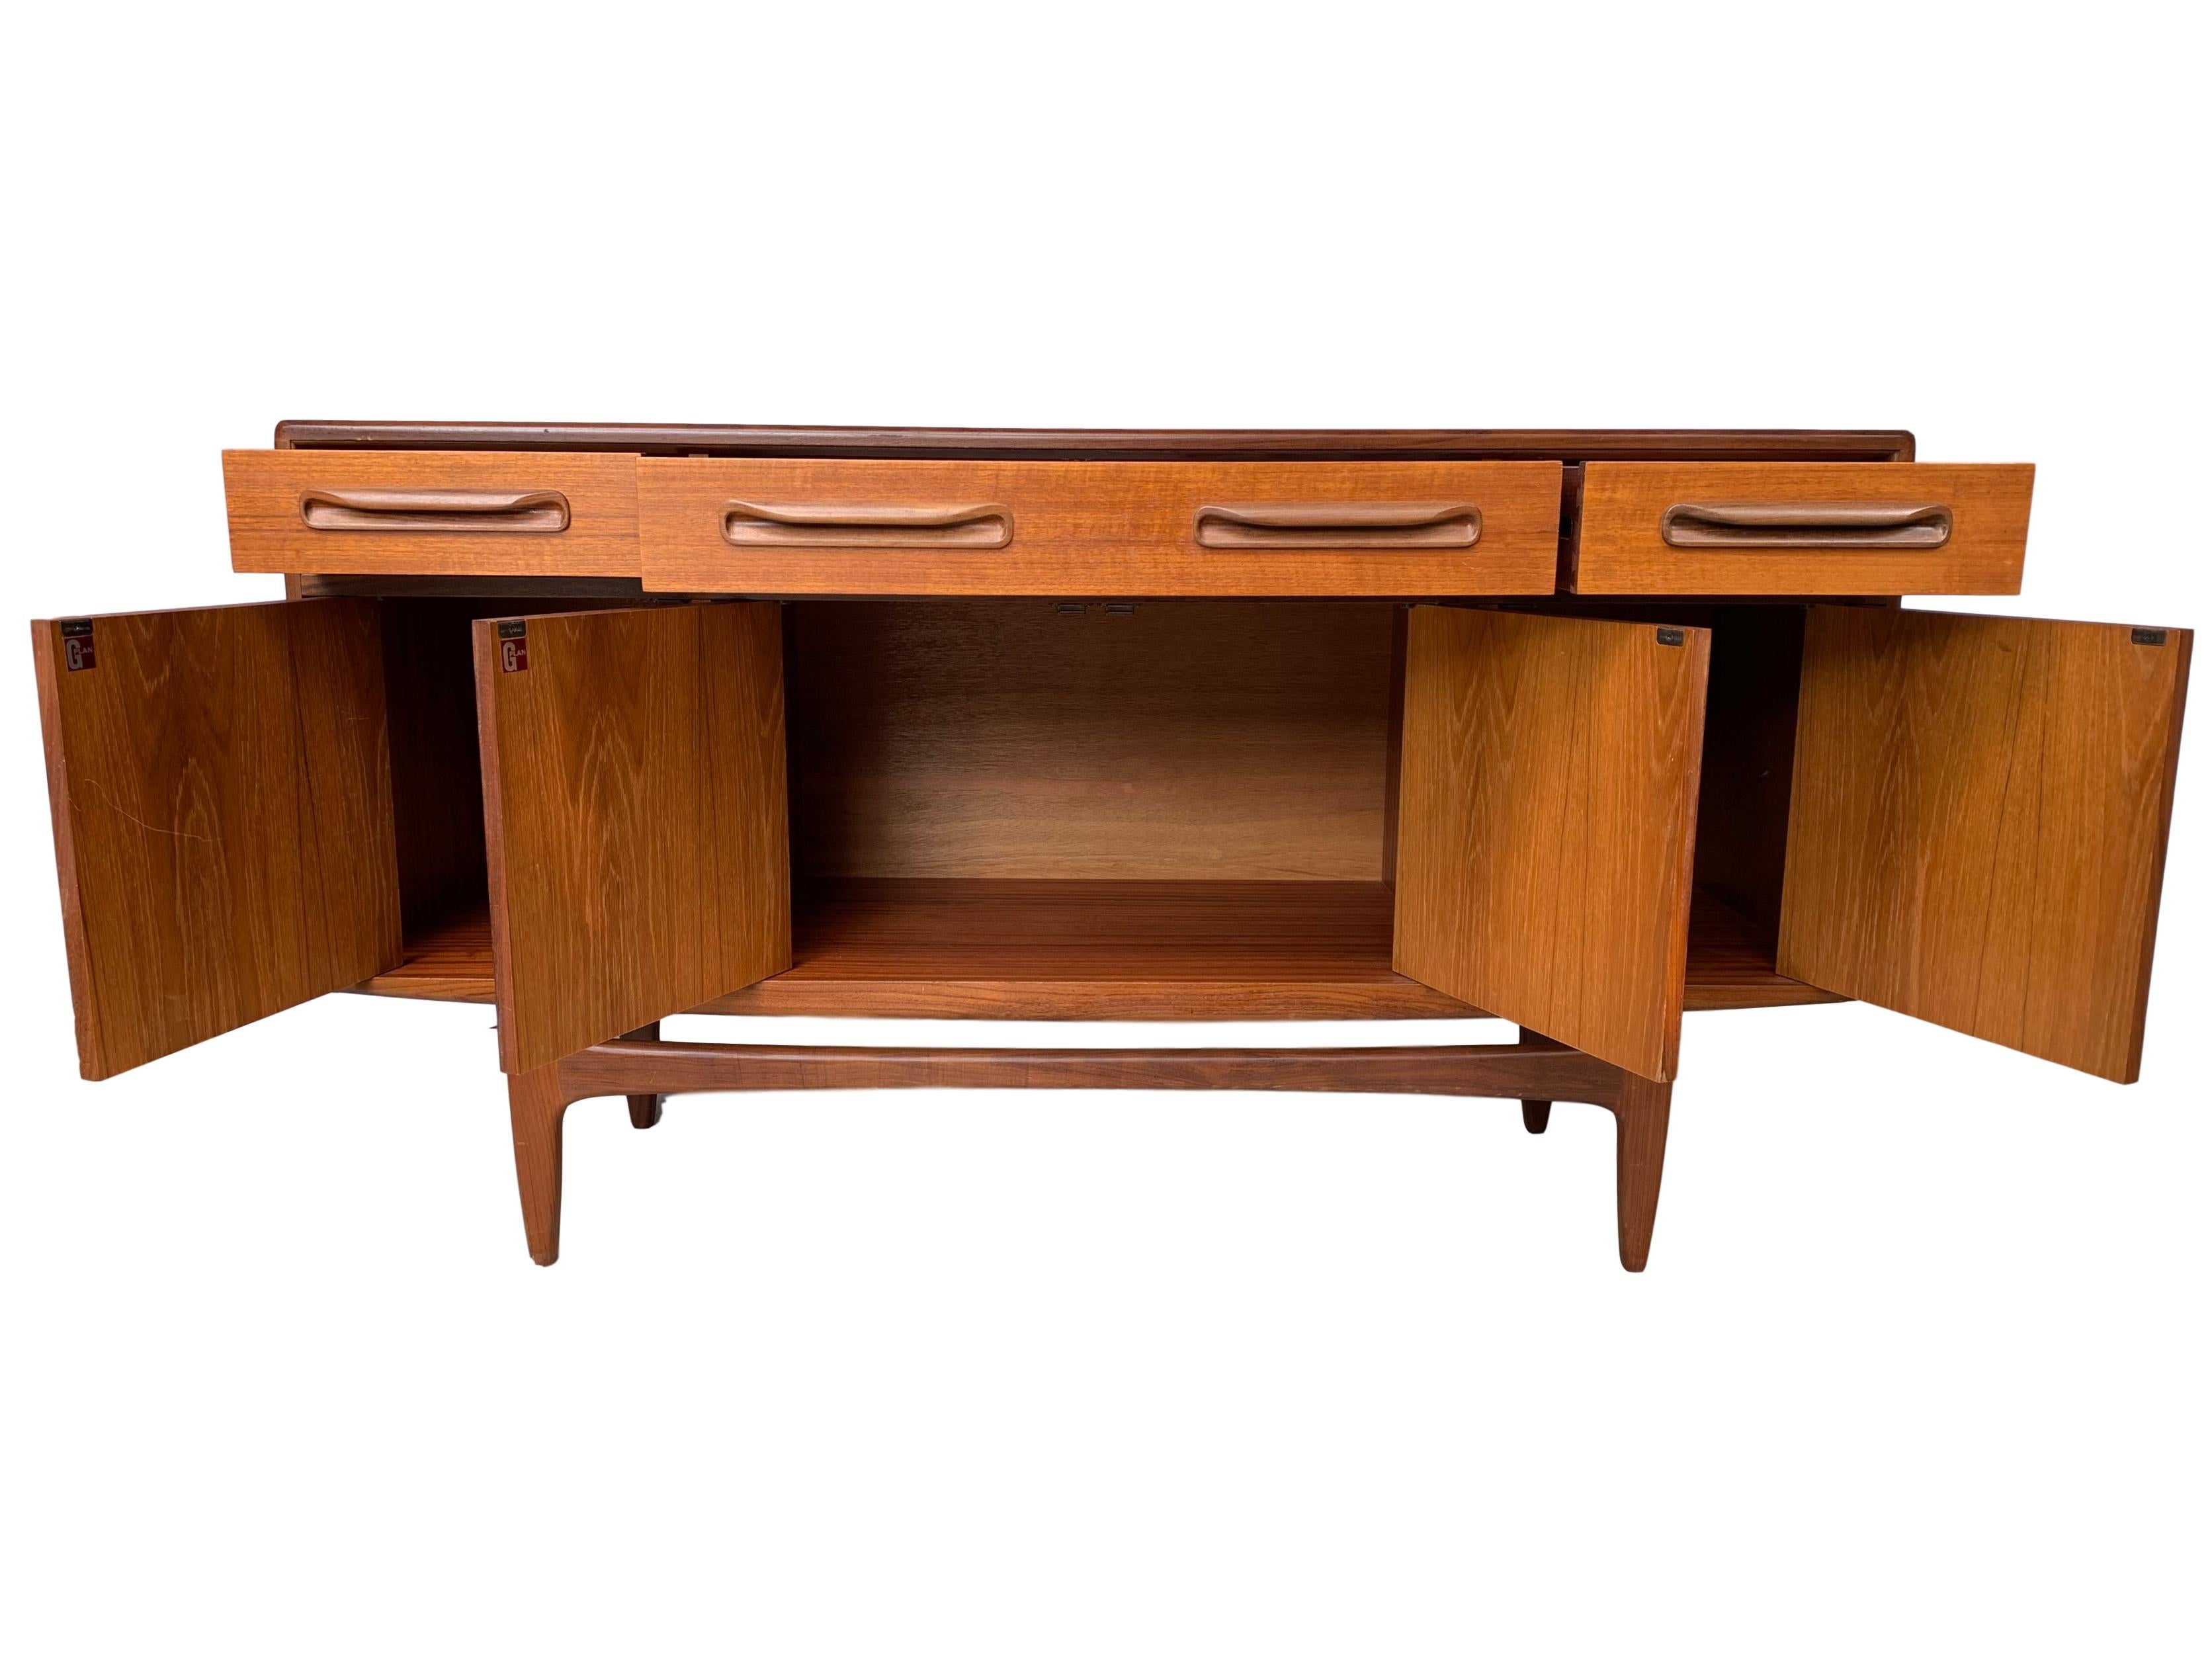 Mid-Century Modern teak sideboard credenza by G-Plan, English, circa 1960, on highly desirable 